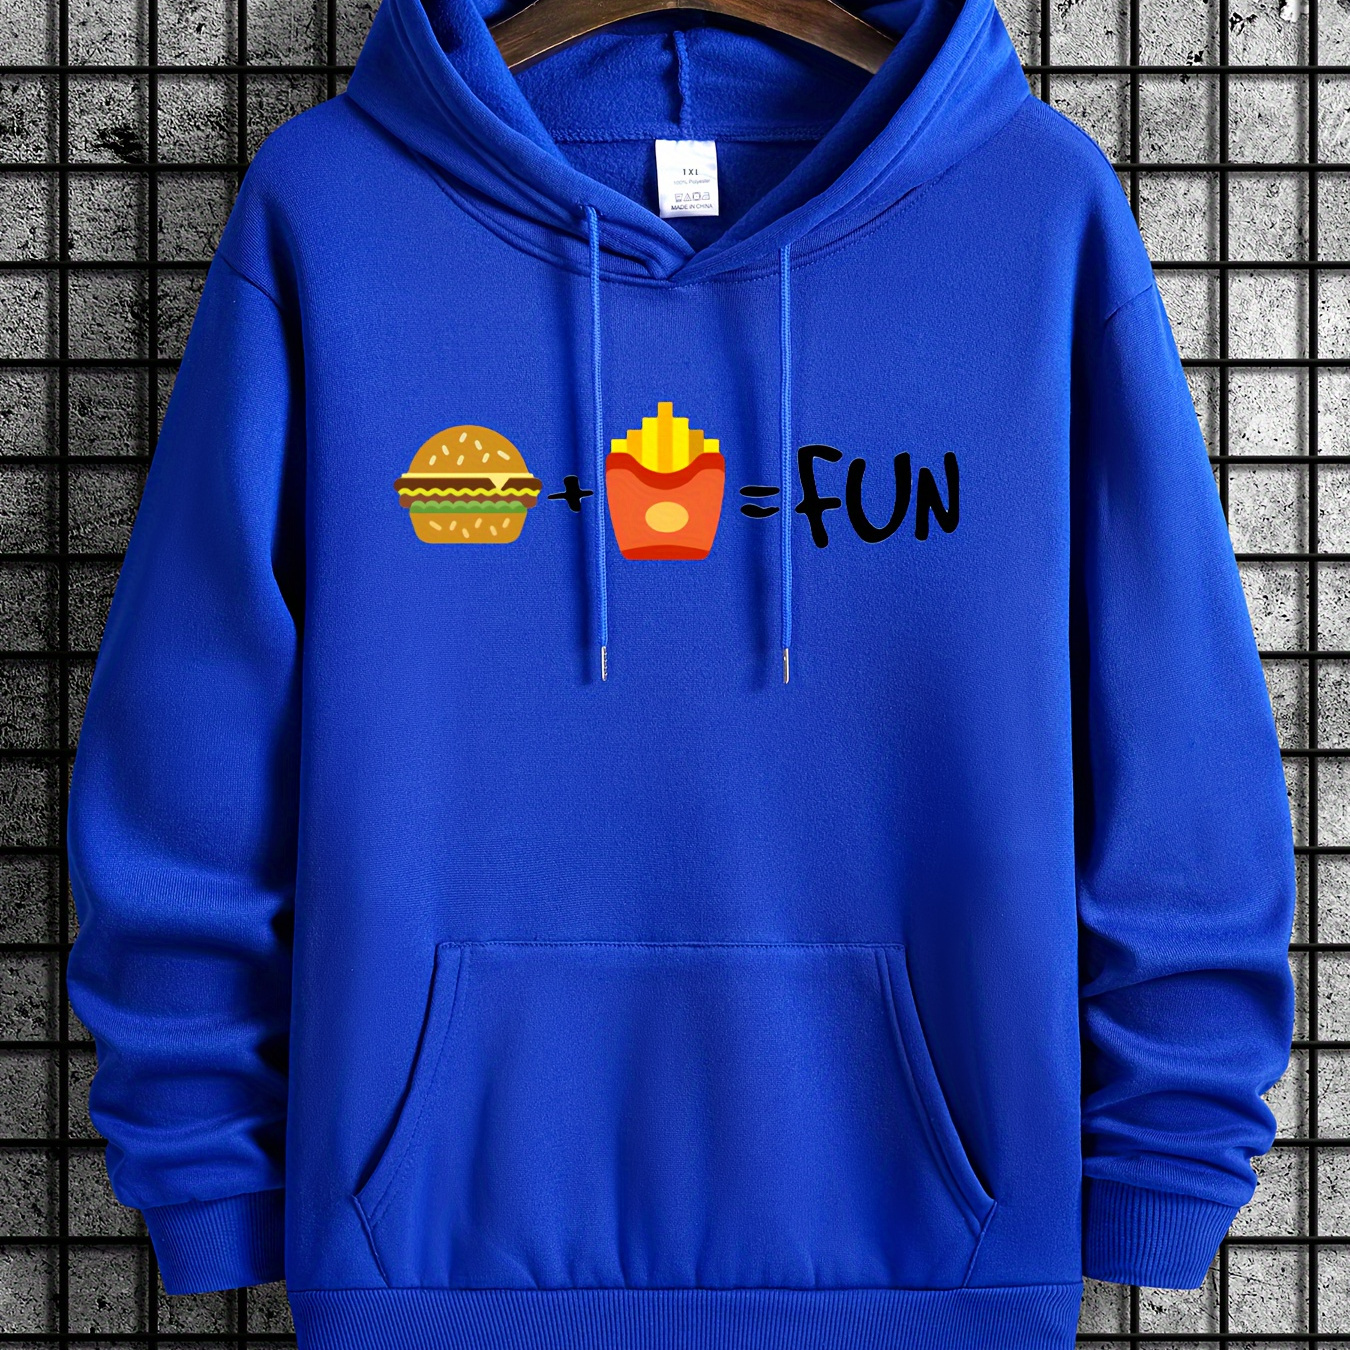 

Plus Size Men's Anime Hamburger & Chips Graphic Print Hoodies Fashion Casual Hooded Sweatshirt For Fall Winter, Men's Clothing